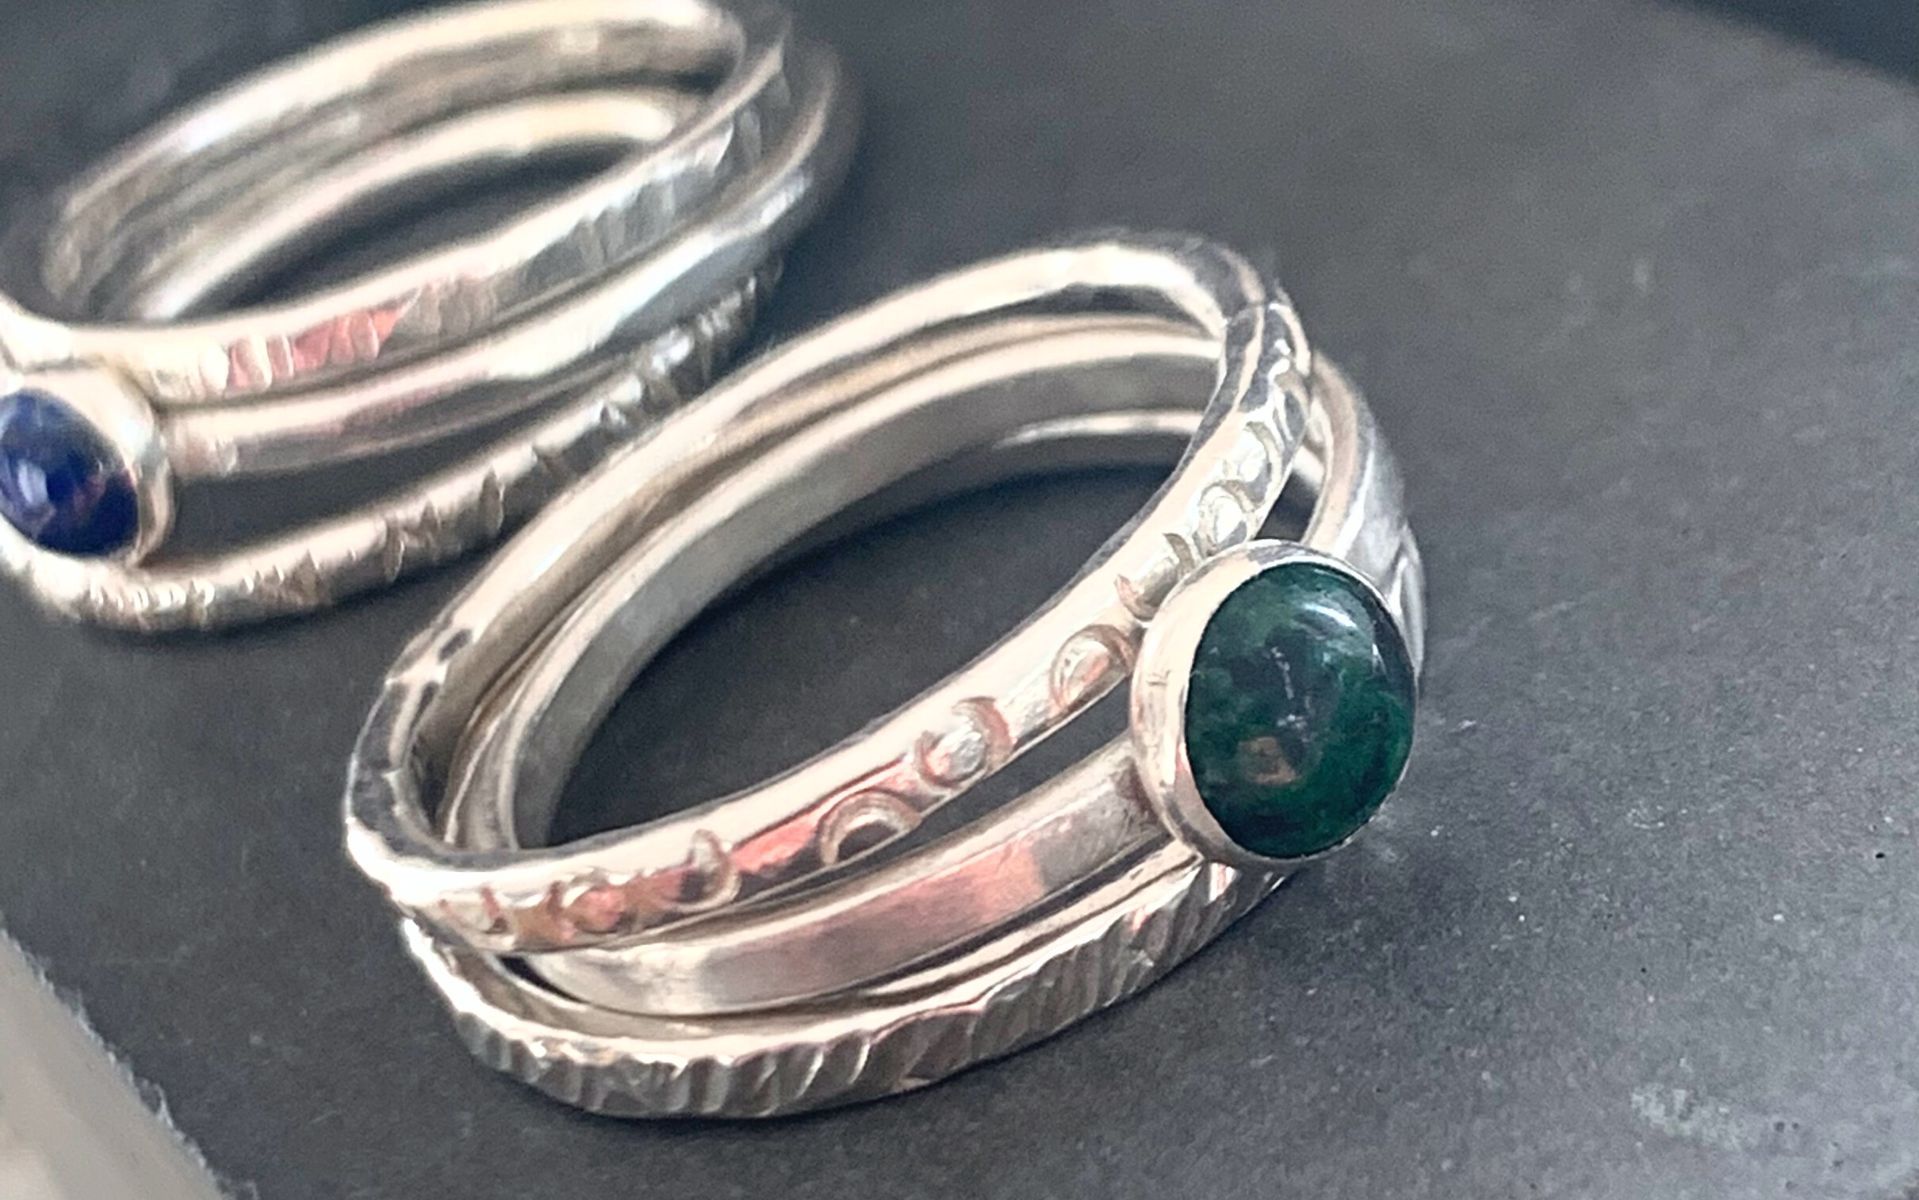 image of a set of gemstone and silver rings